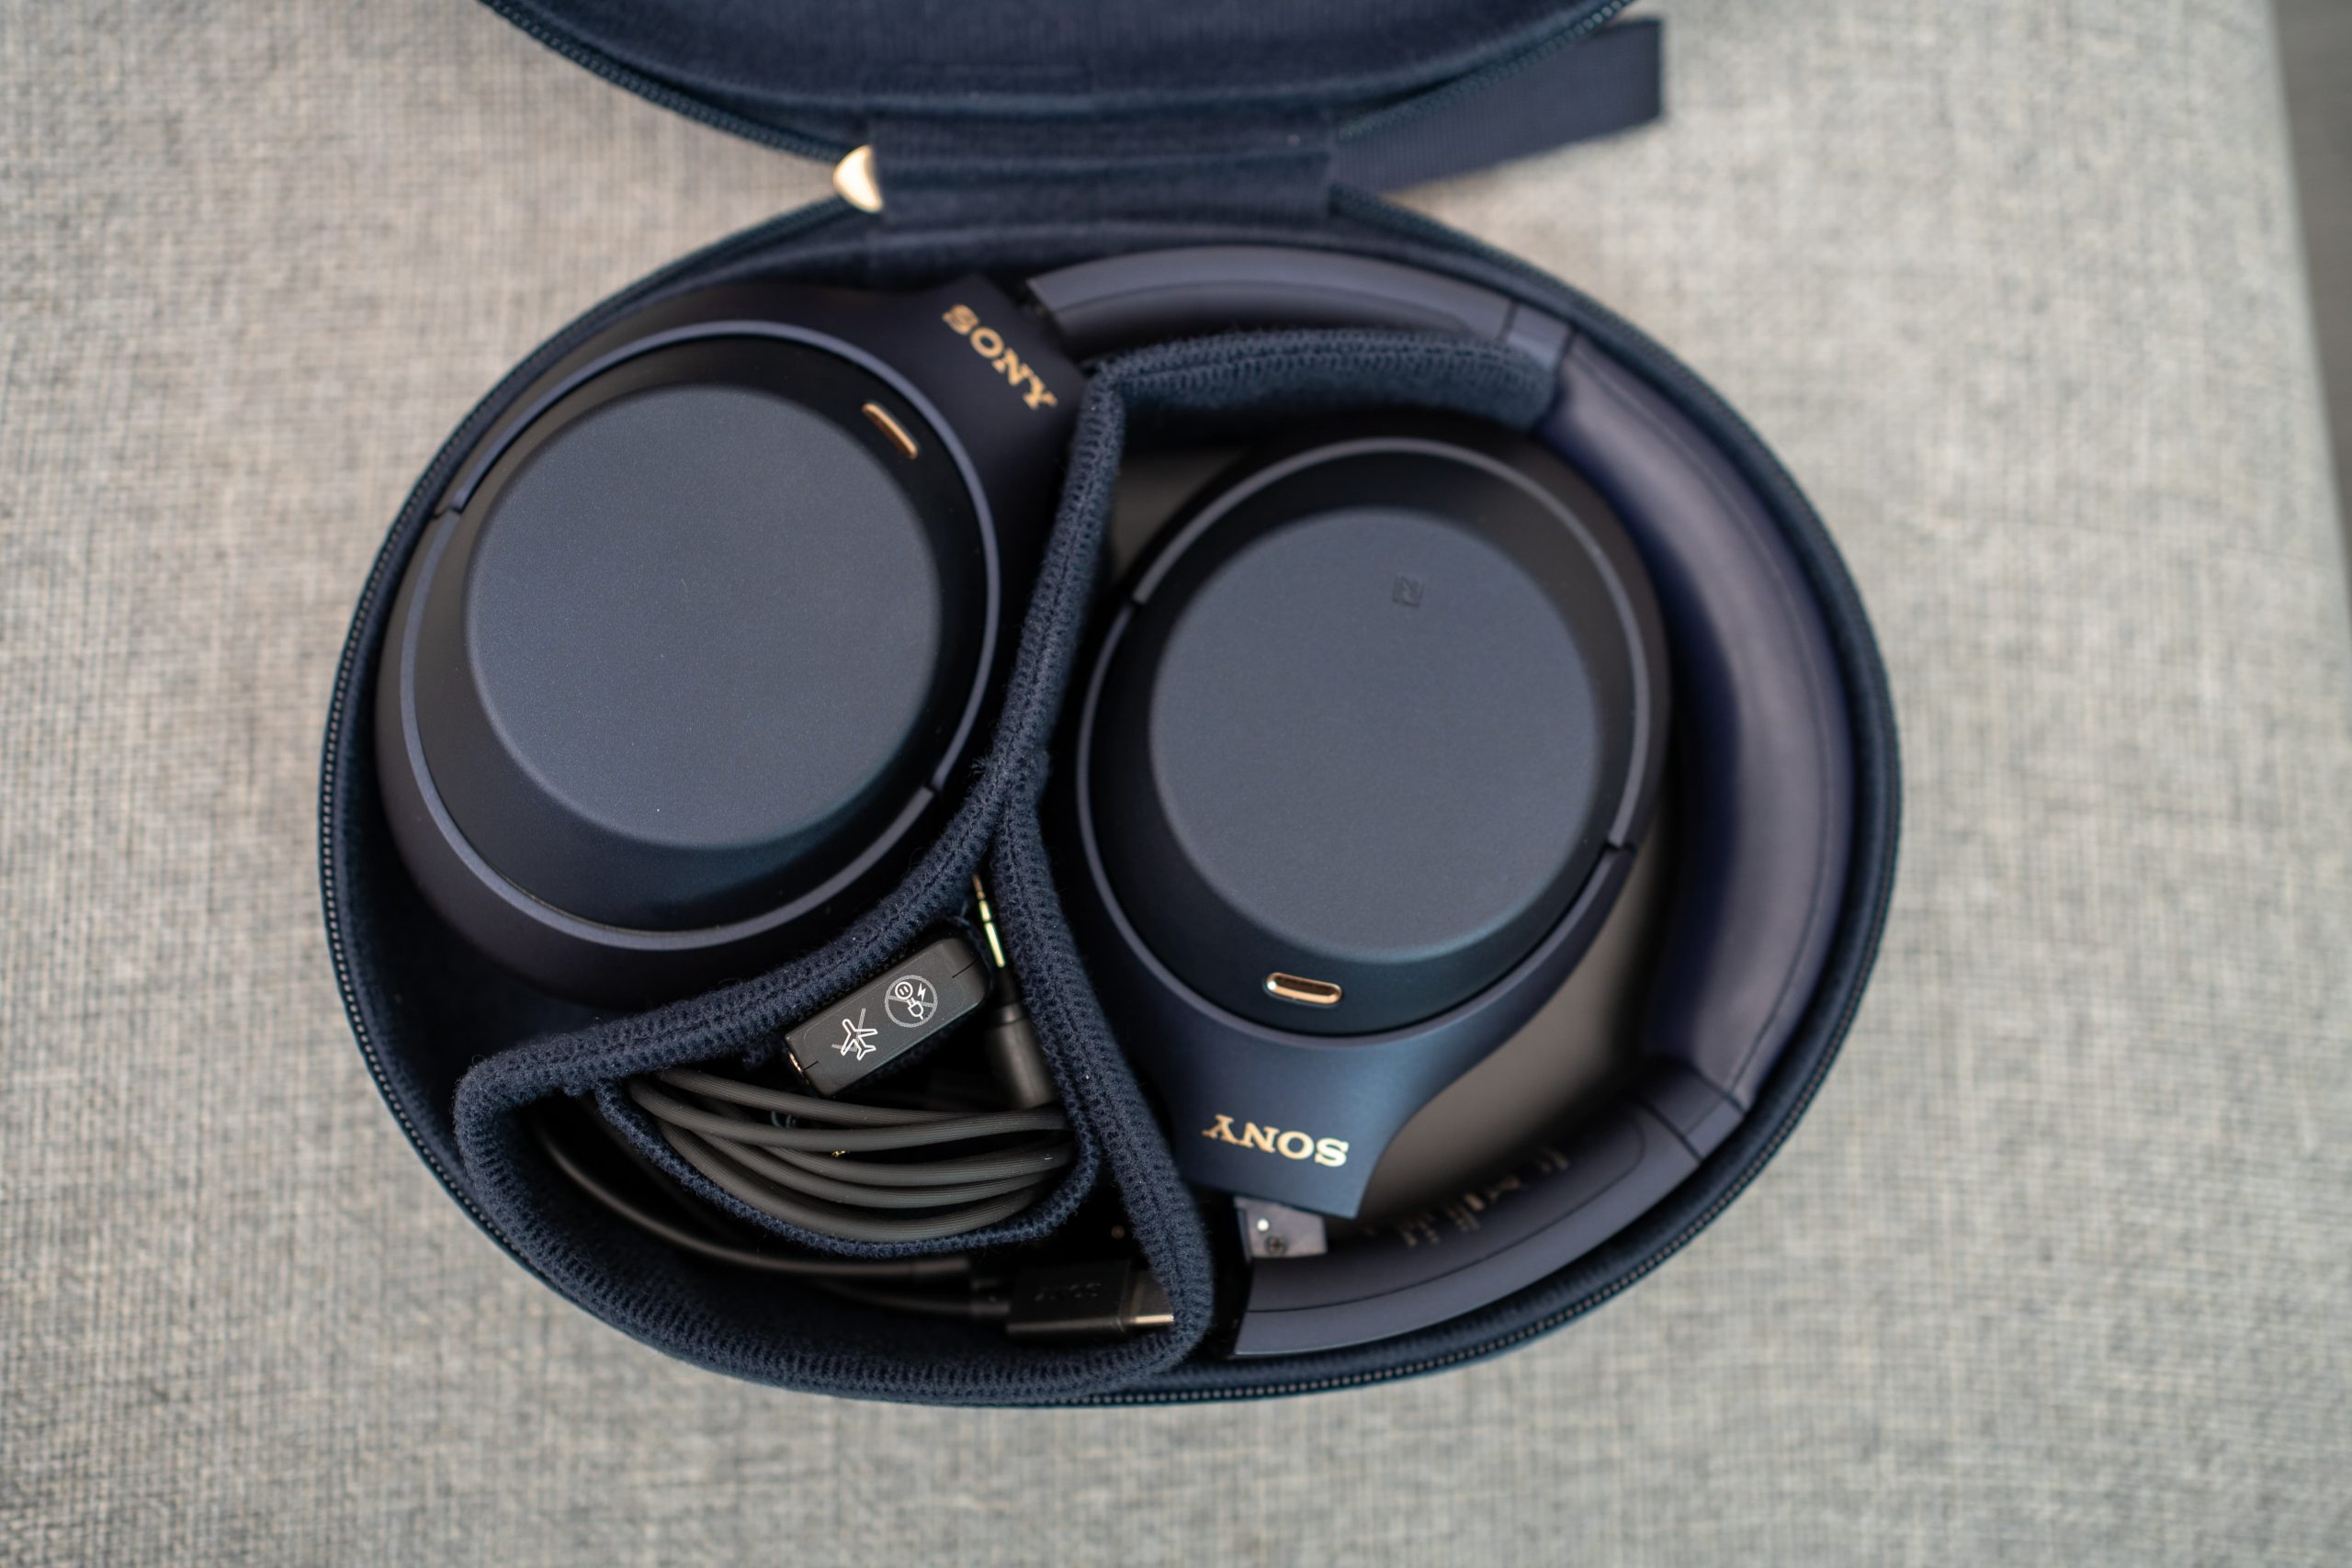 Sony WH-1000XM4 in a case Noise cancelling Headphones for a travel blog review